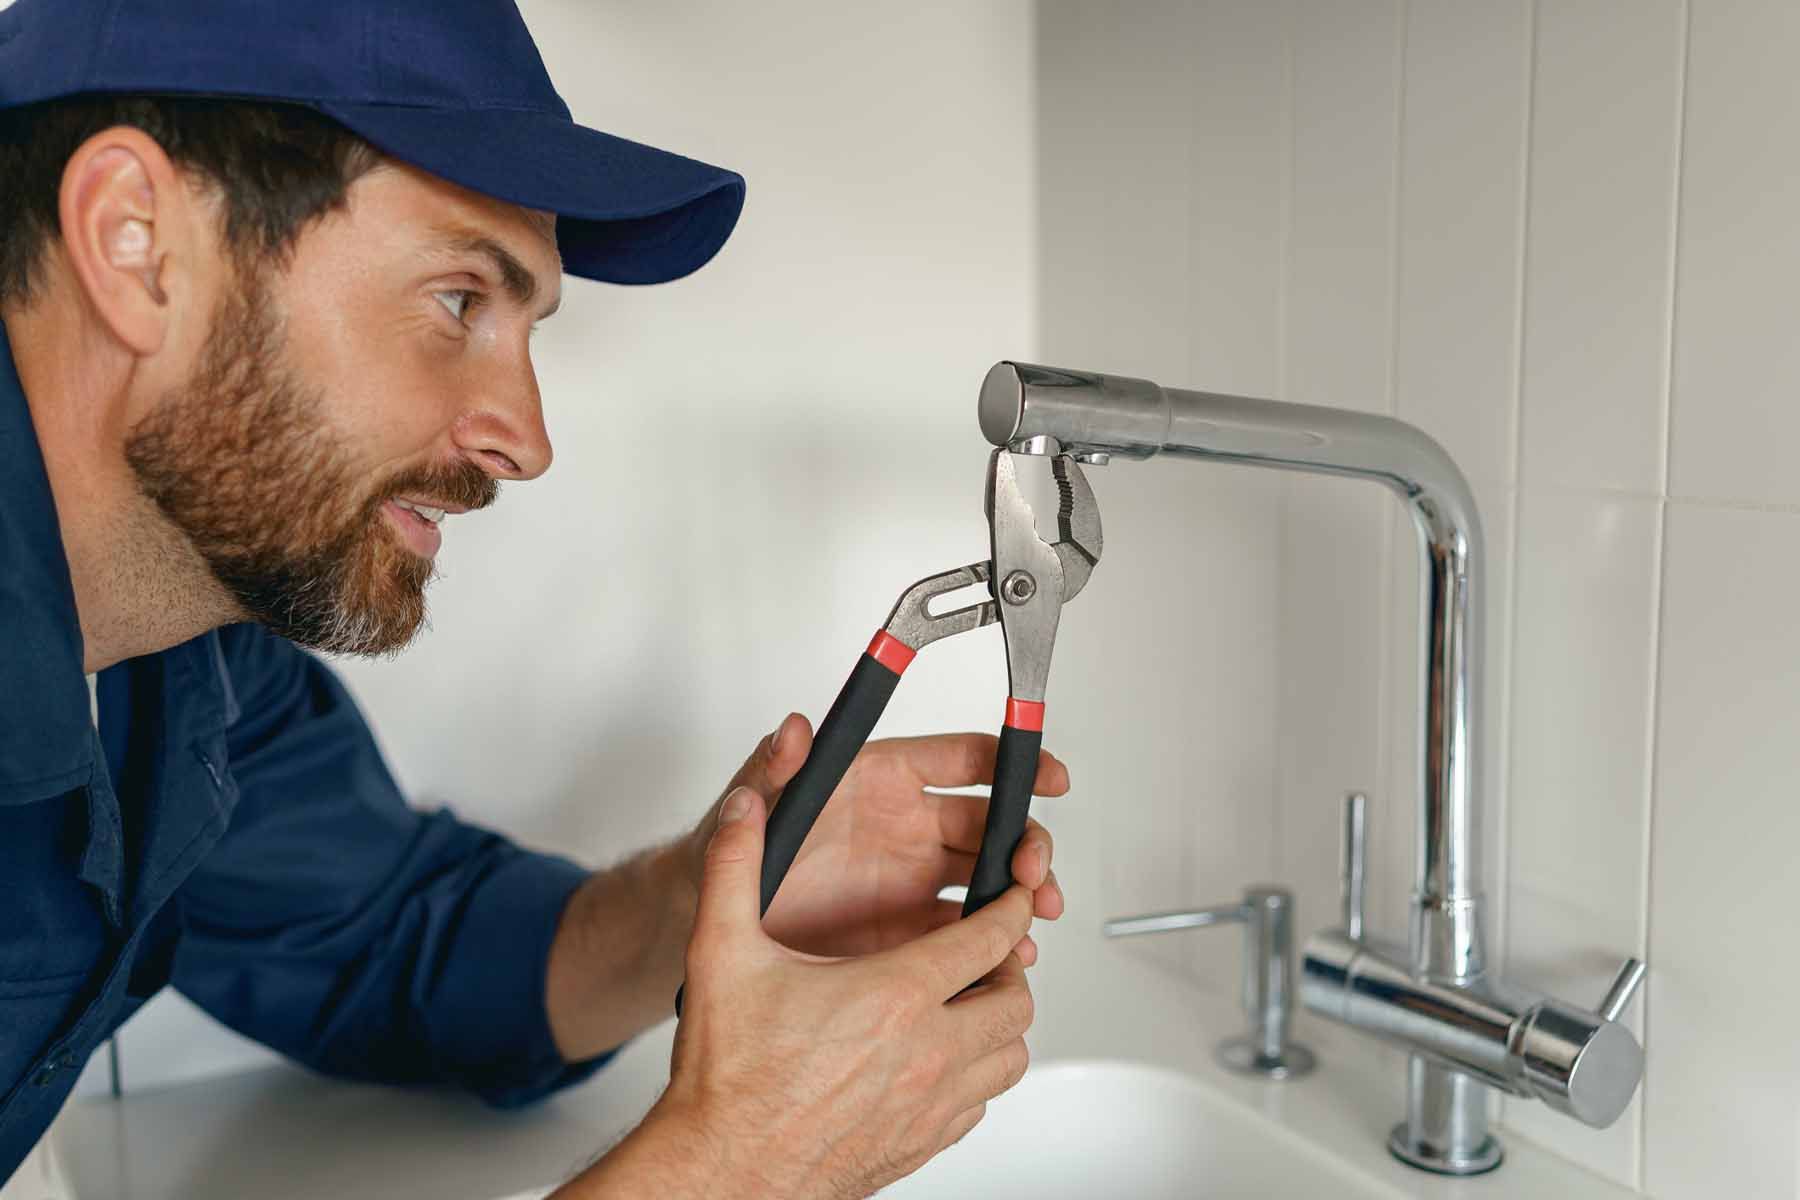 a plumber repairing tap with the help of his tool